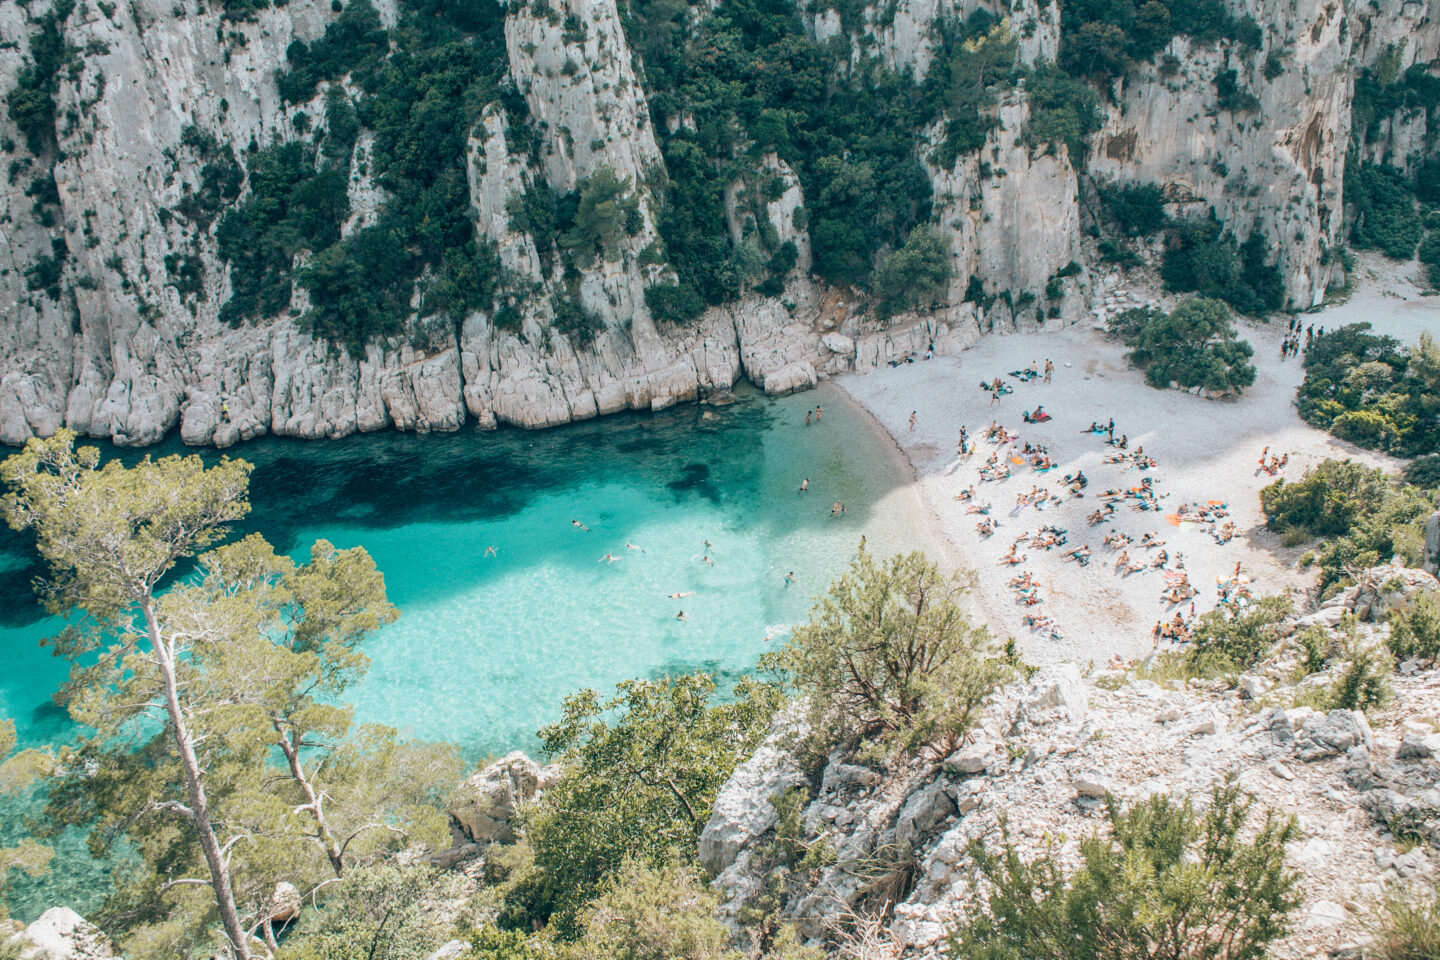 Looking down at the rocky cliffs, turquoise waters and bathers on one of the secluded beaches of Calanques National Park in Cassis, France.